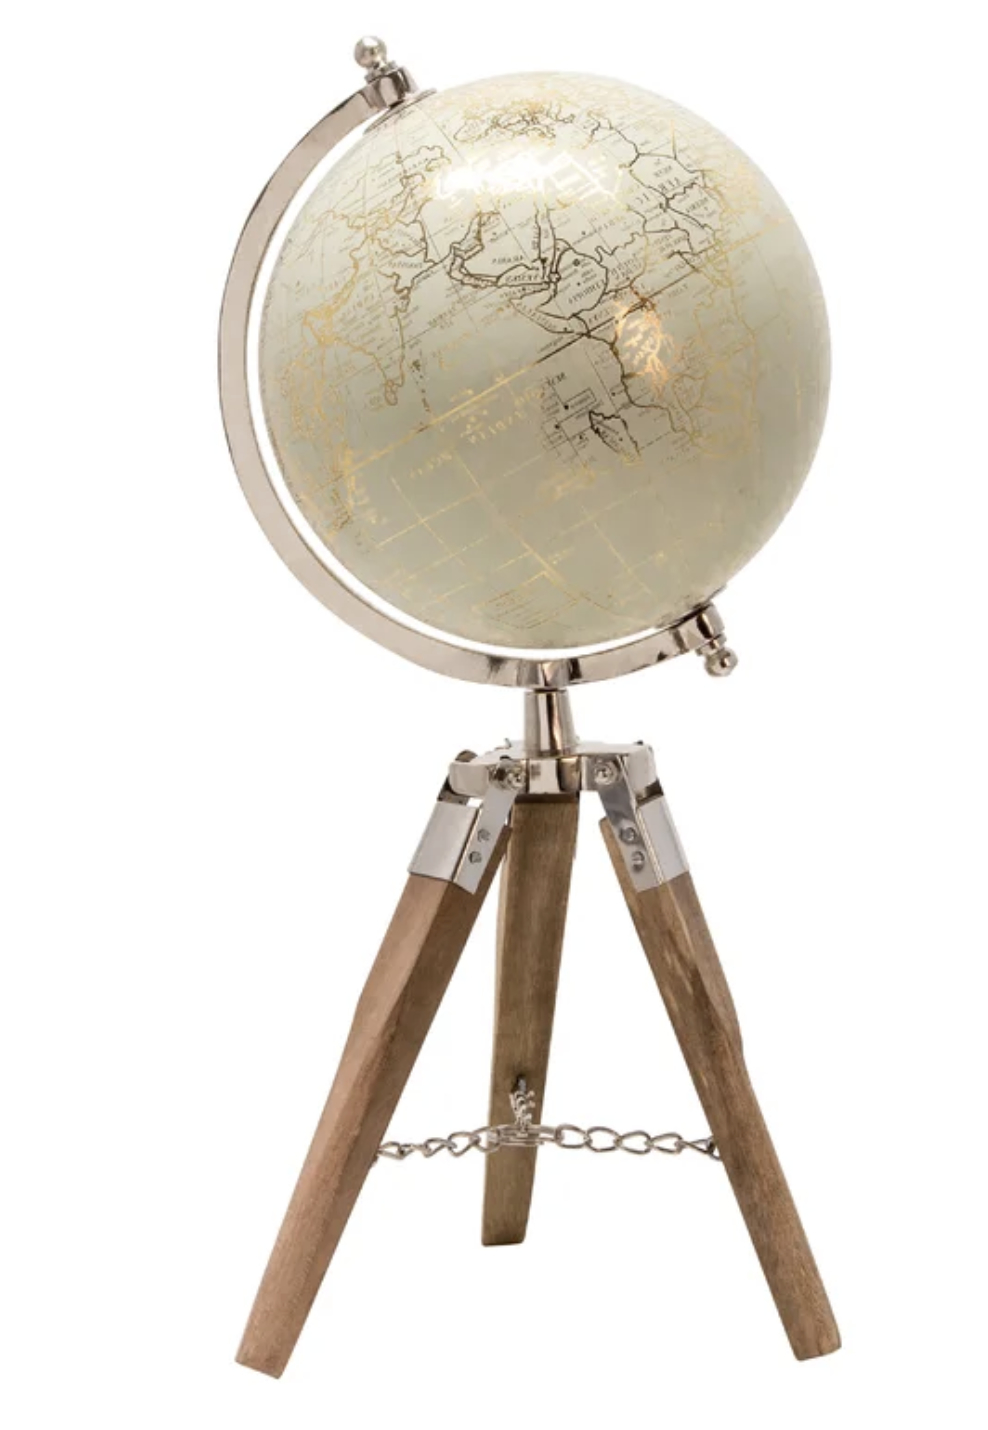 A raised globe on a wooden tripod stand with a metal meridian